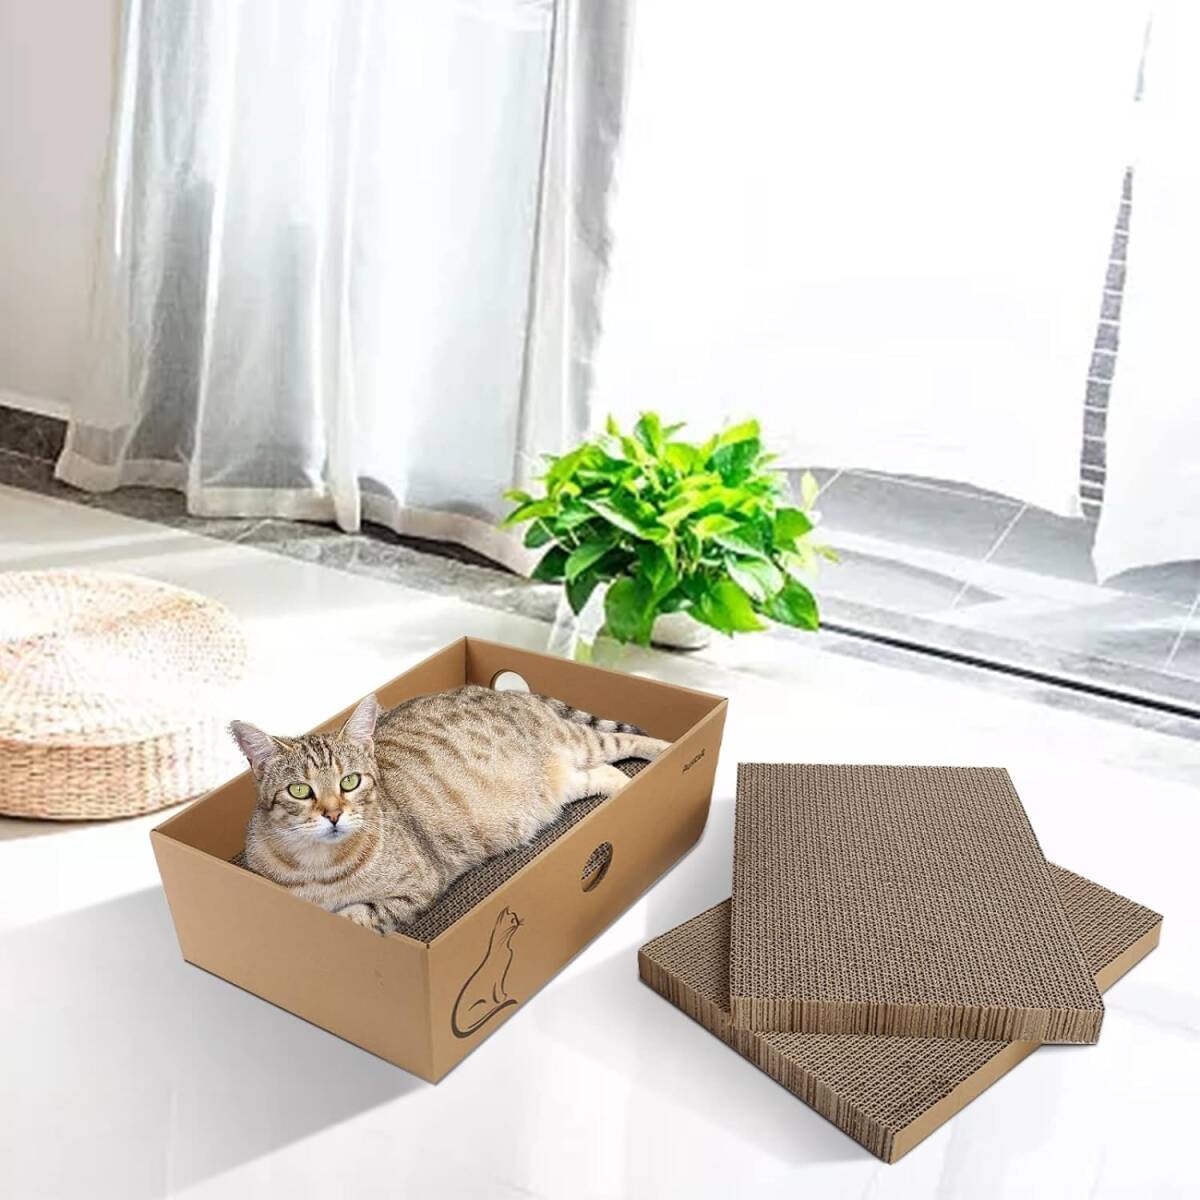  cardboard box type nail ..AUSCAT cat nail .. cat for rust .... replacement for nail sharpen 4 sheets entering cat bed combined use box type 37×27×13